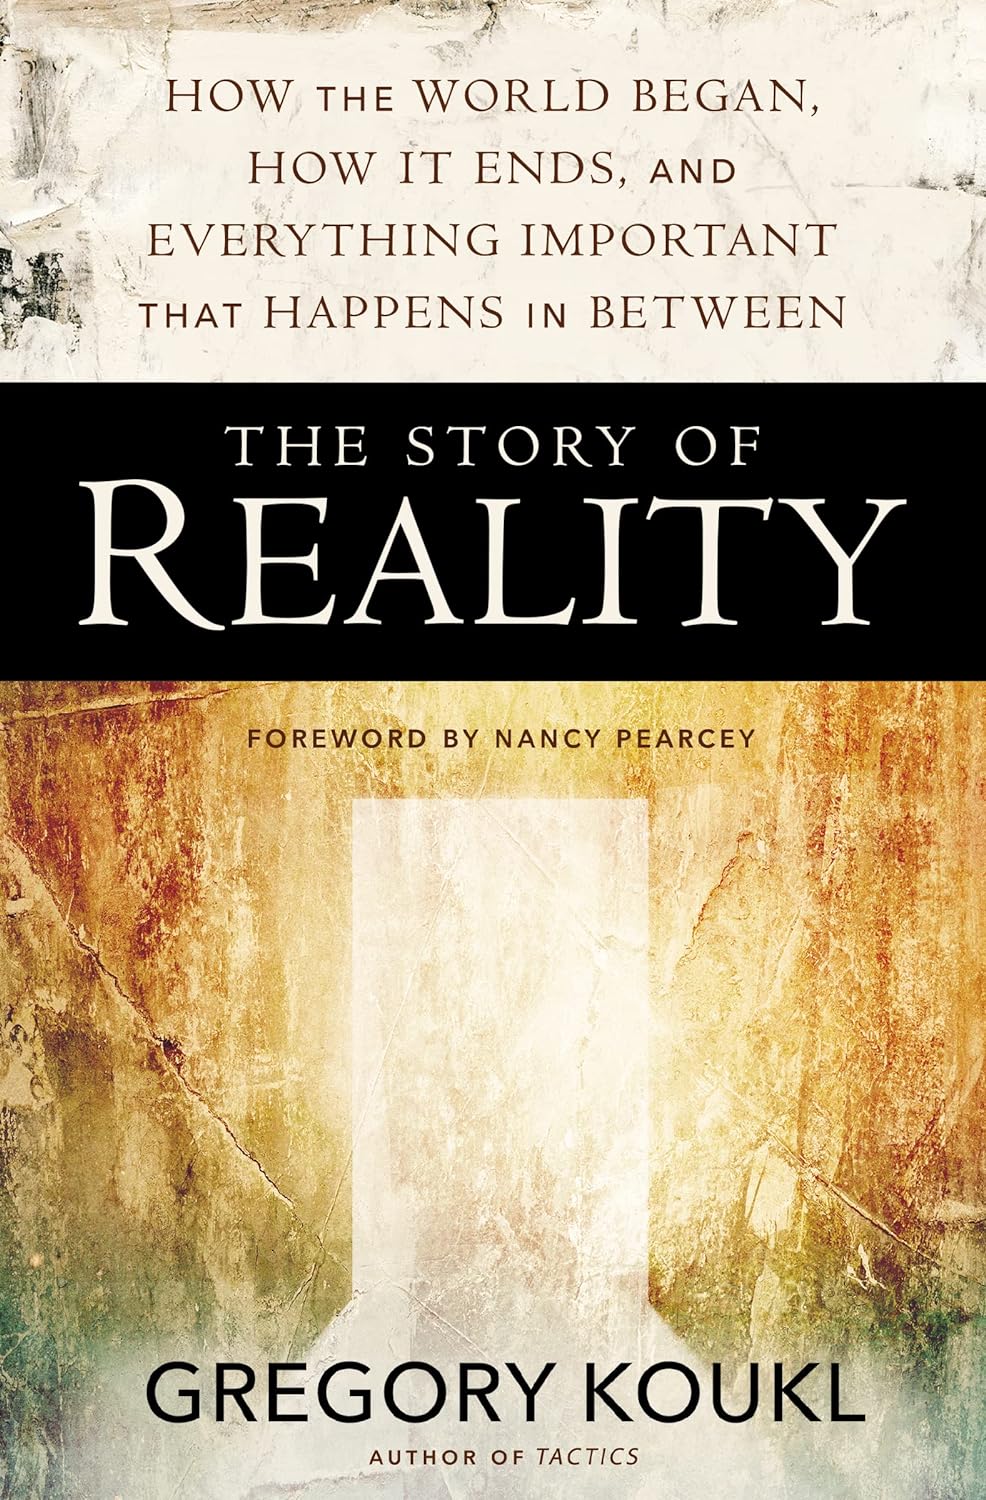 The Story of Reality: How the World Began, How It Ends, and Everything Important that Happens in Between